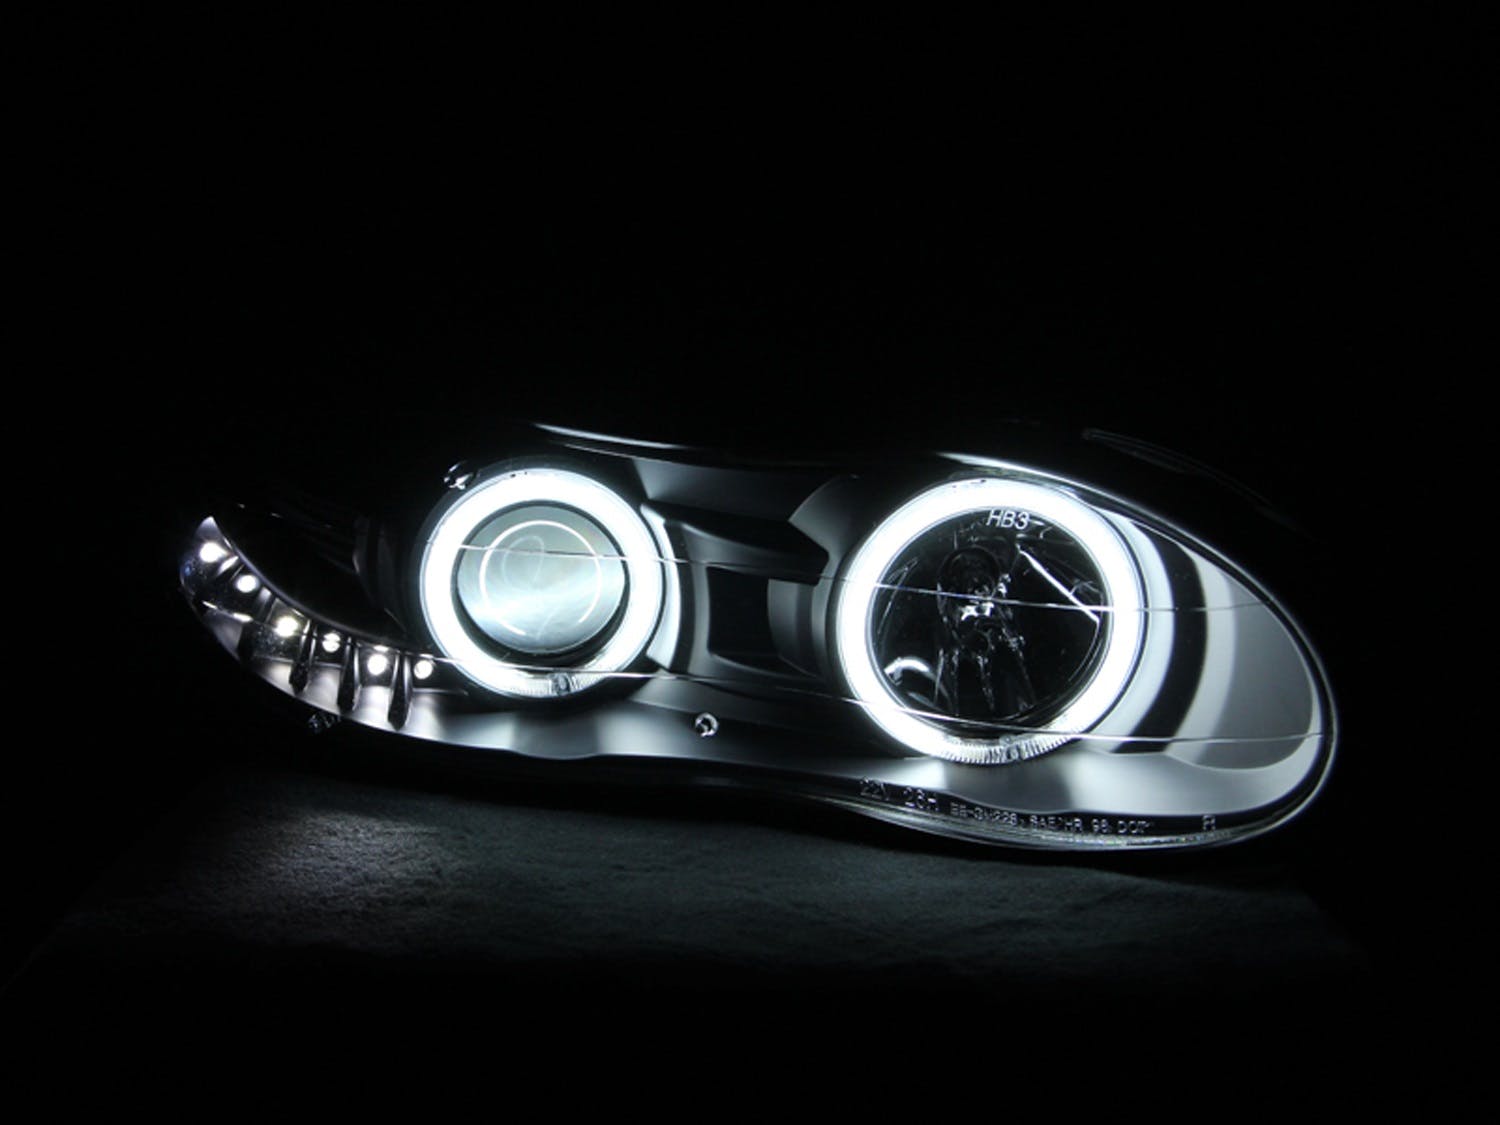 AnzoUSA 121160 Projector Headlights with Halo Black